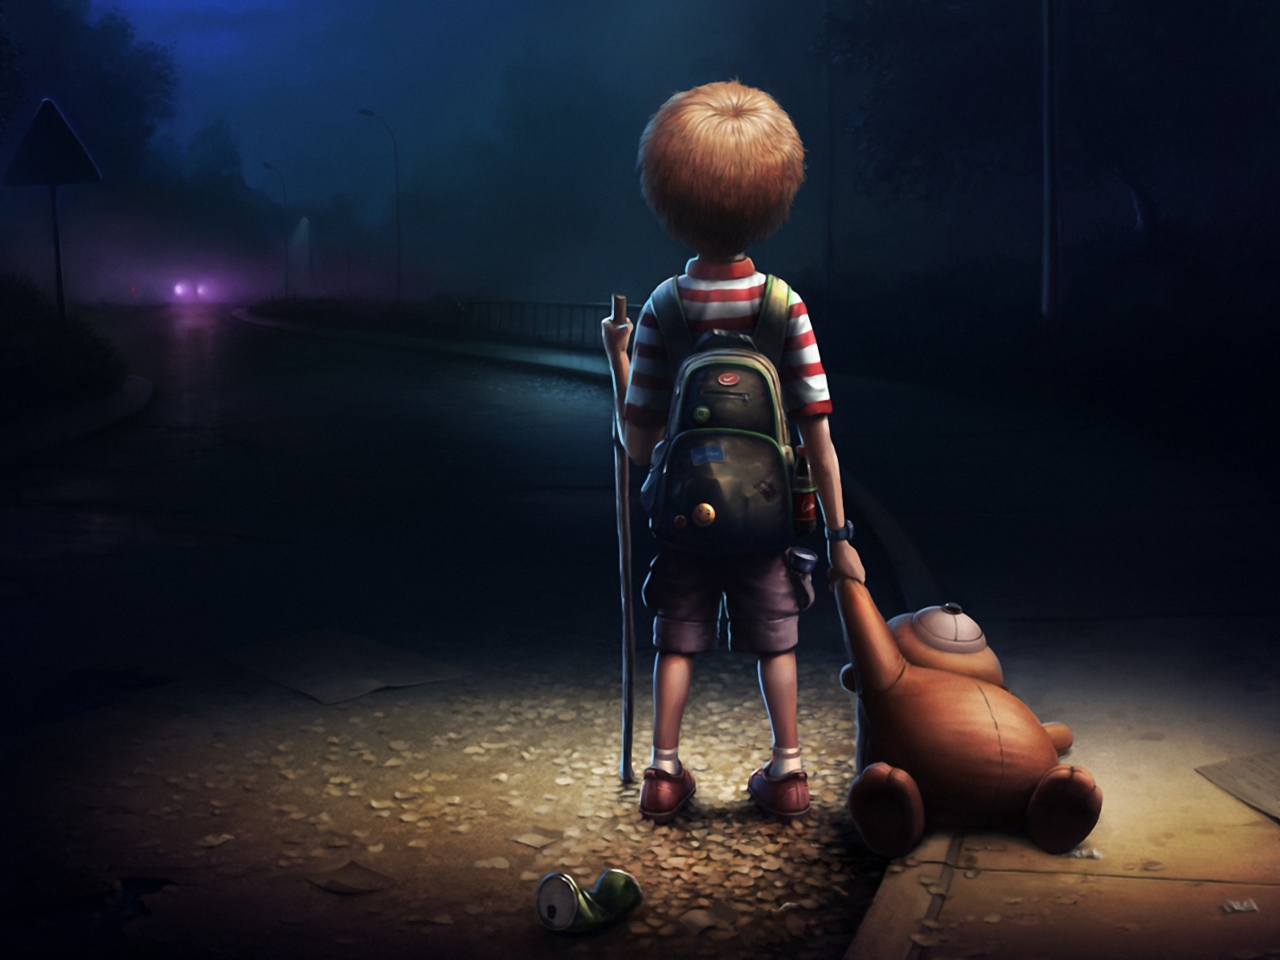 Lonely Child wallpaper 1280x960